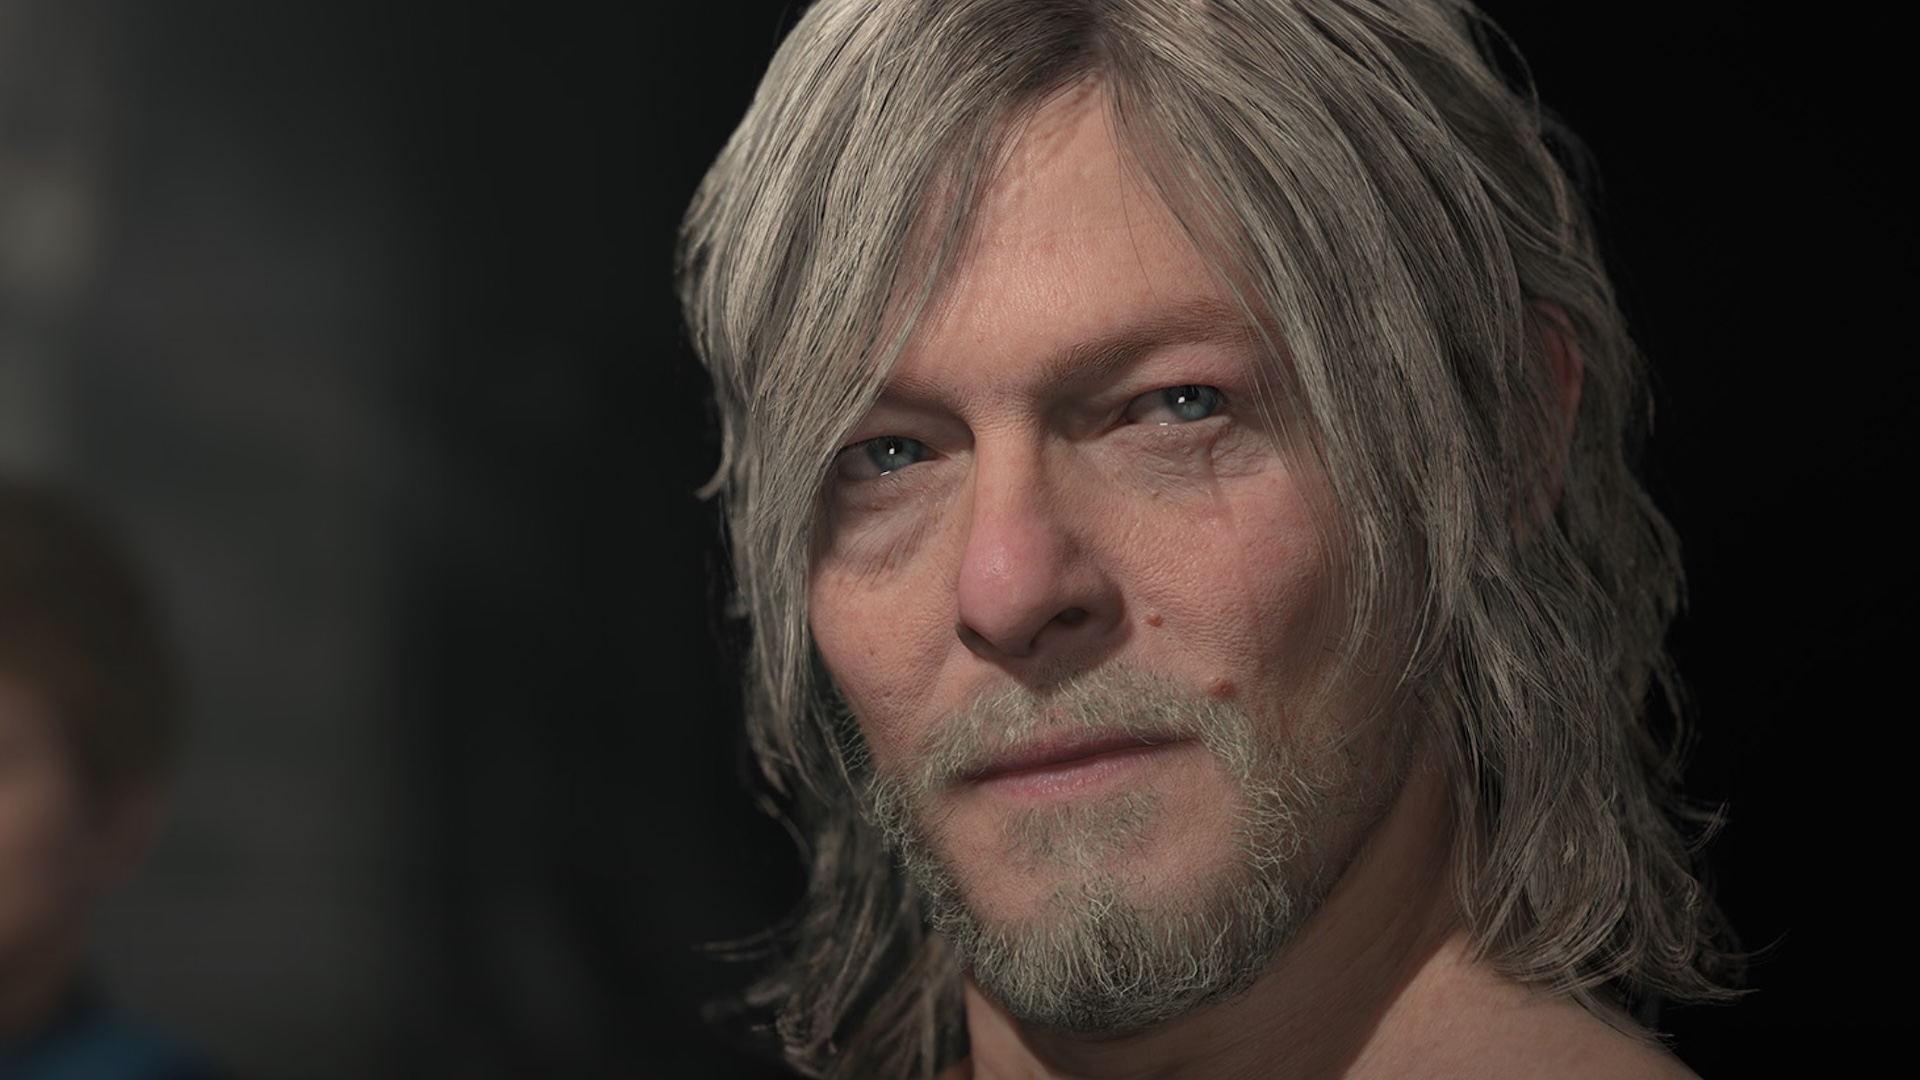 The Game Awards may have teased a new trailer from Kojima